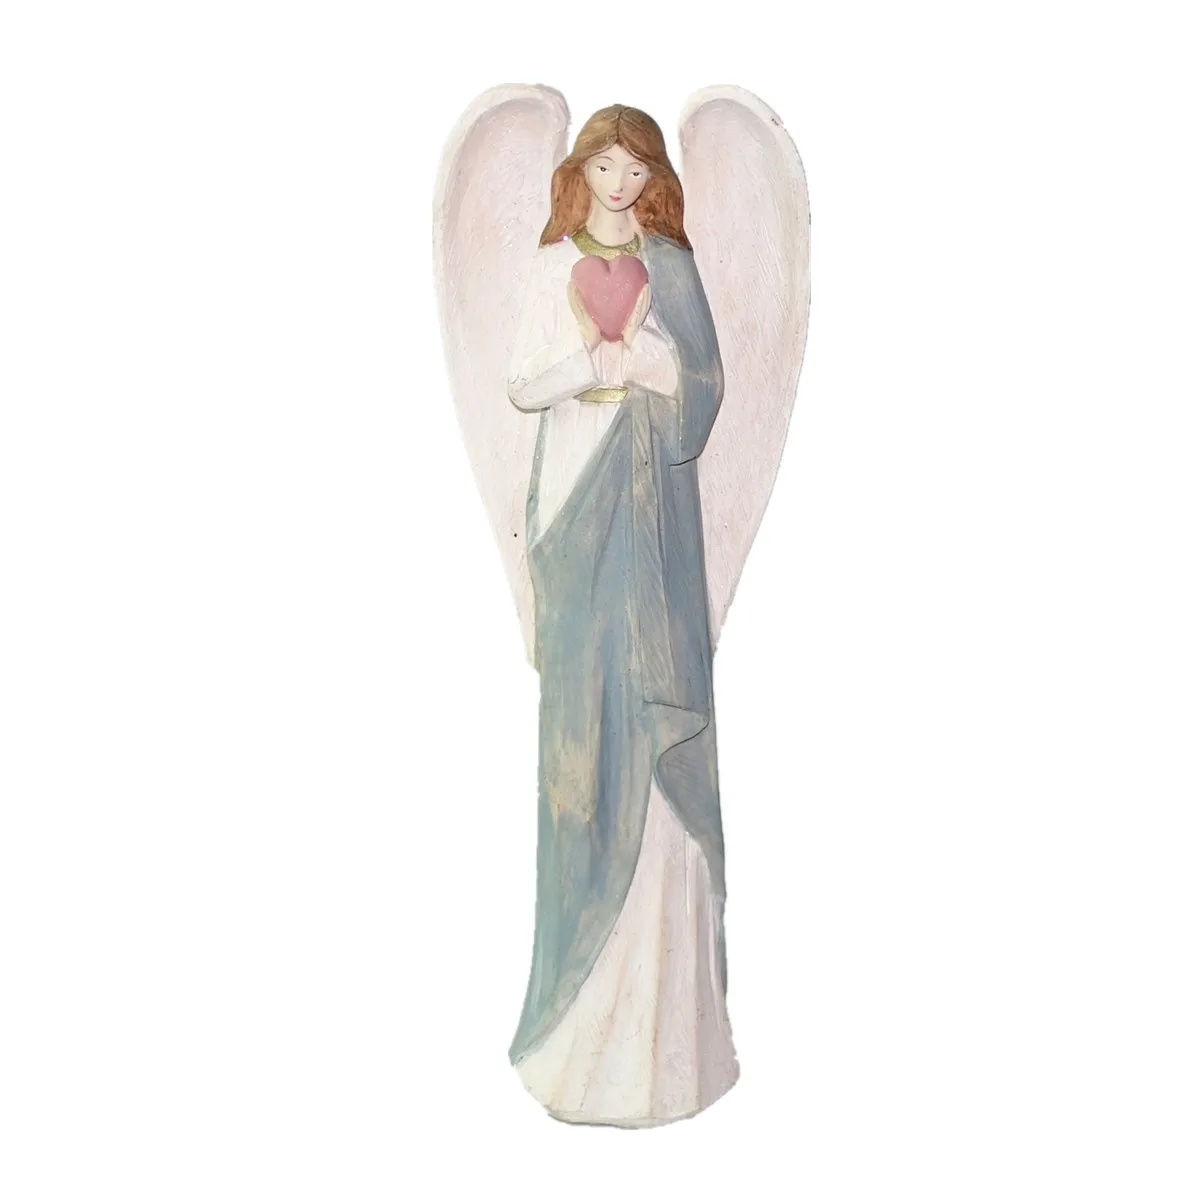 
12 Inch Whole Sale Resin Statue Hand Painted Resin Figurines Sign Peace Resin Wing Angel Figurine Models with Bird 